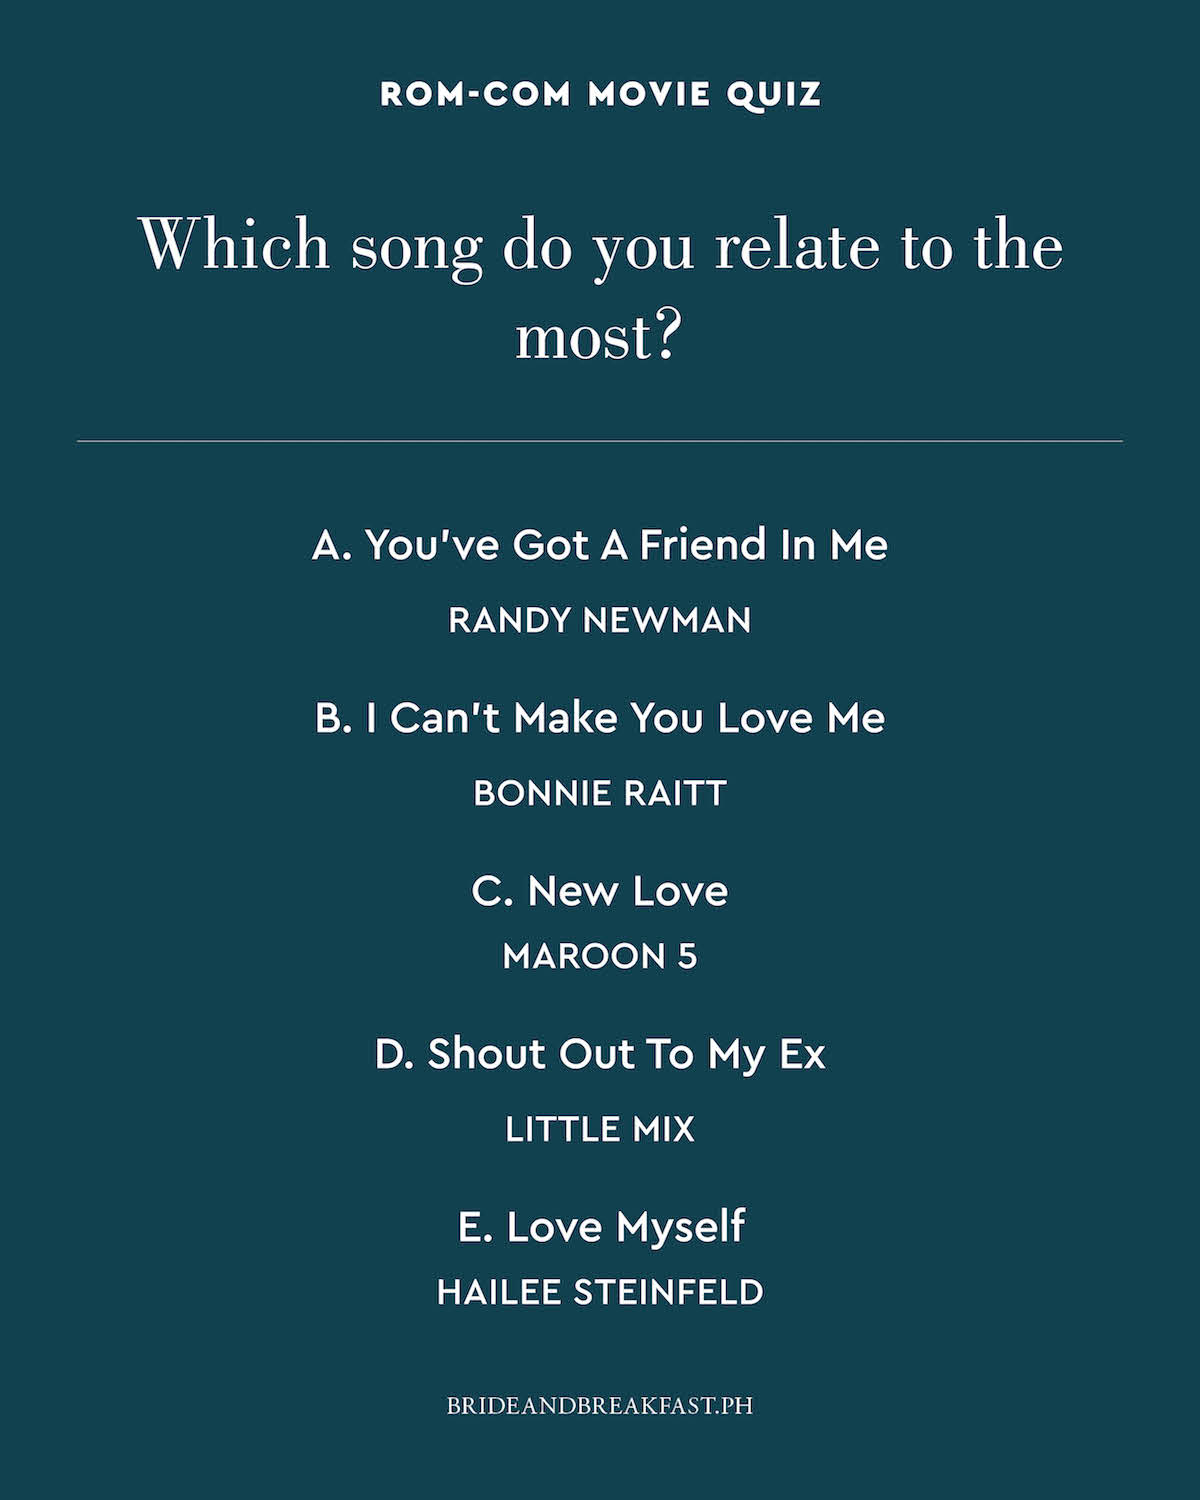 Which song do you relate to the most? A. You've Got A Friend In Me by: Randy Newman B. I Can't Make You Love Me by: Bonnie Raitt C. New Love by: Maroon 5 D. Shout Out To My Ex by: Little Mix E. Love Myself by: Hailee Steinfeld